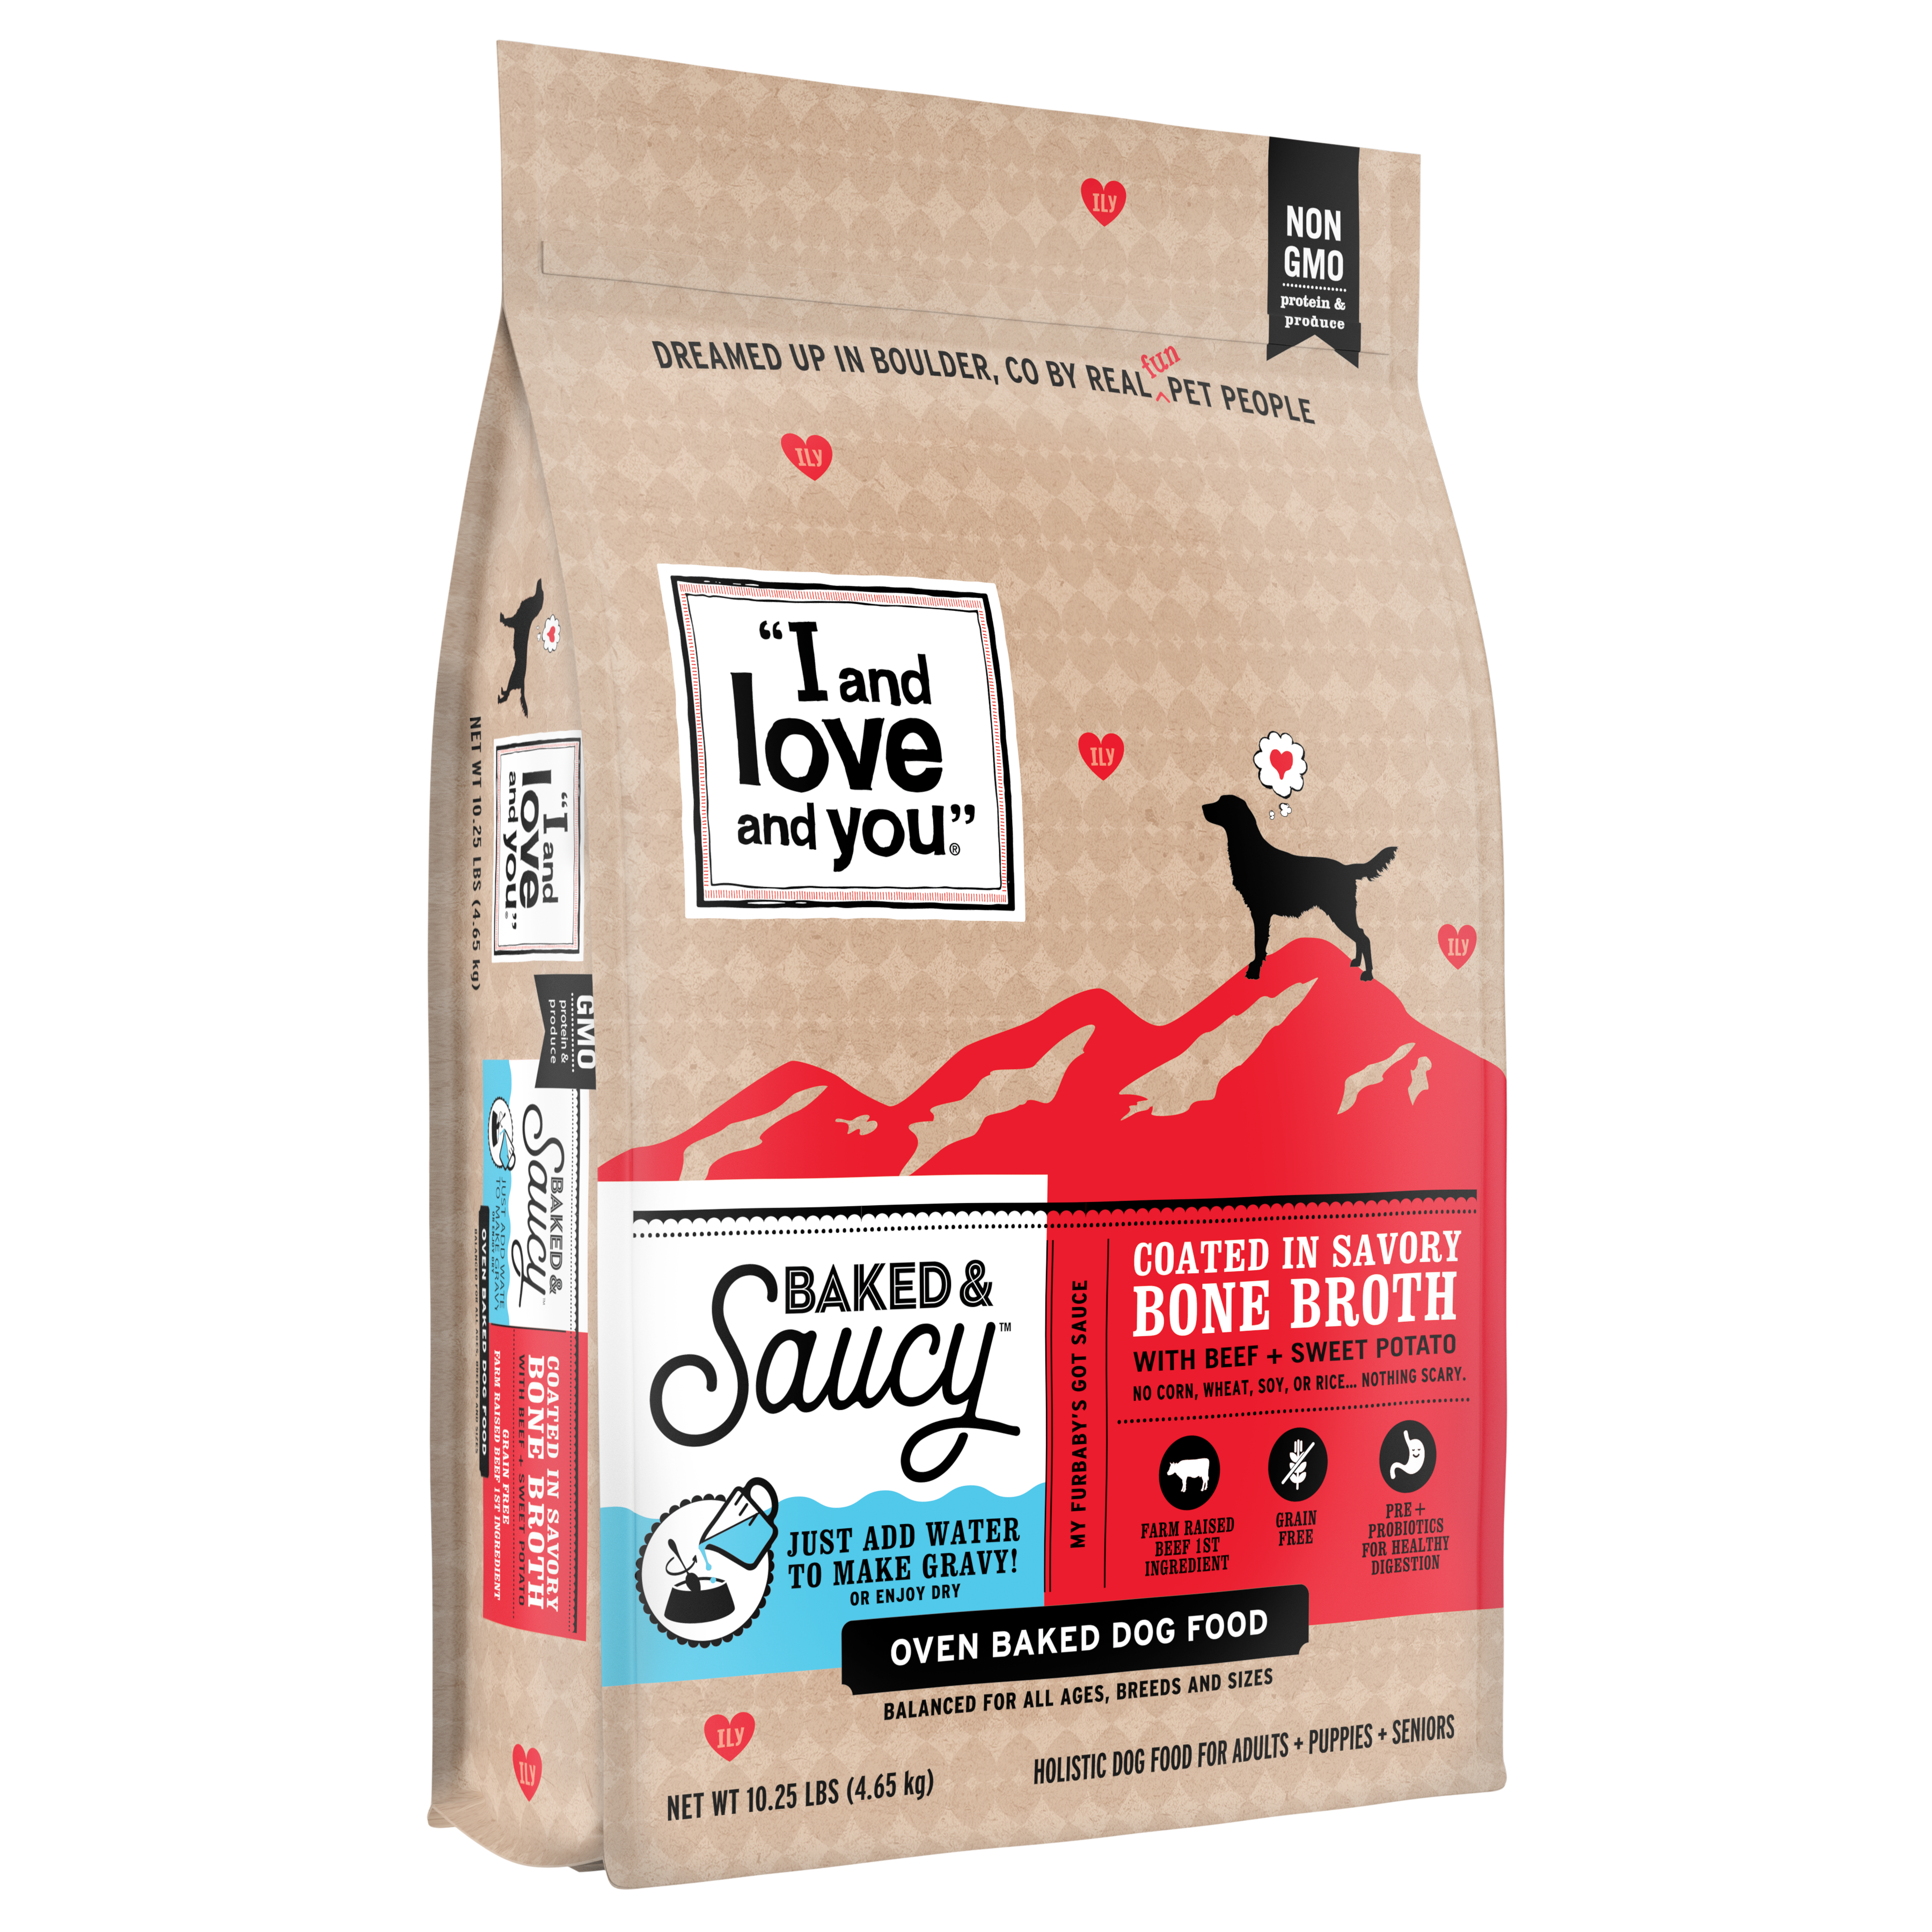 Baked & Saucy is a coated kibble that can be rehydrated from 